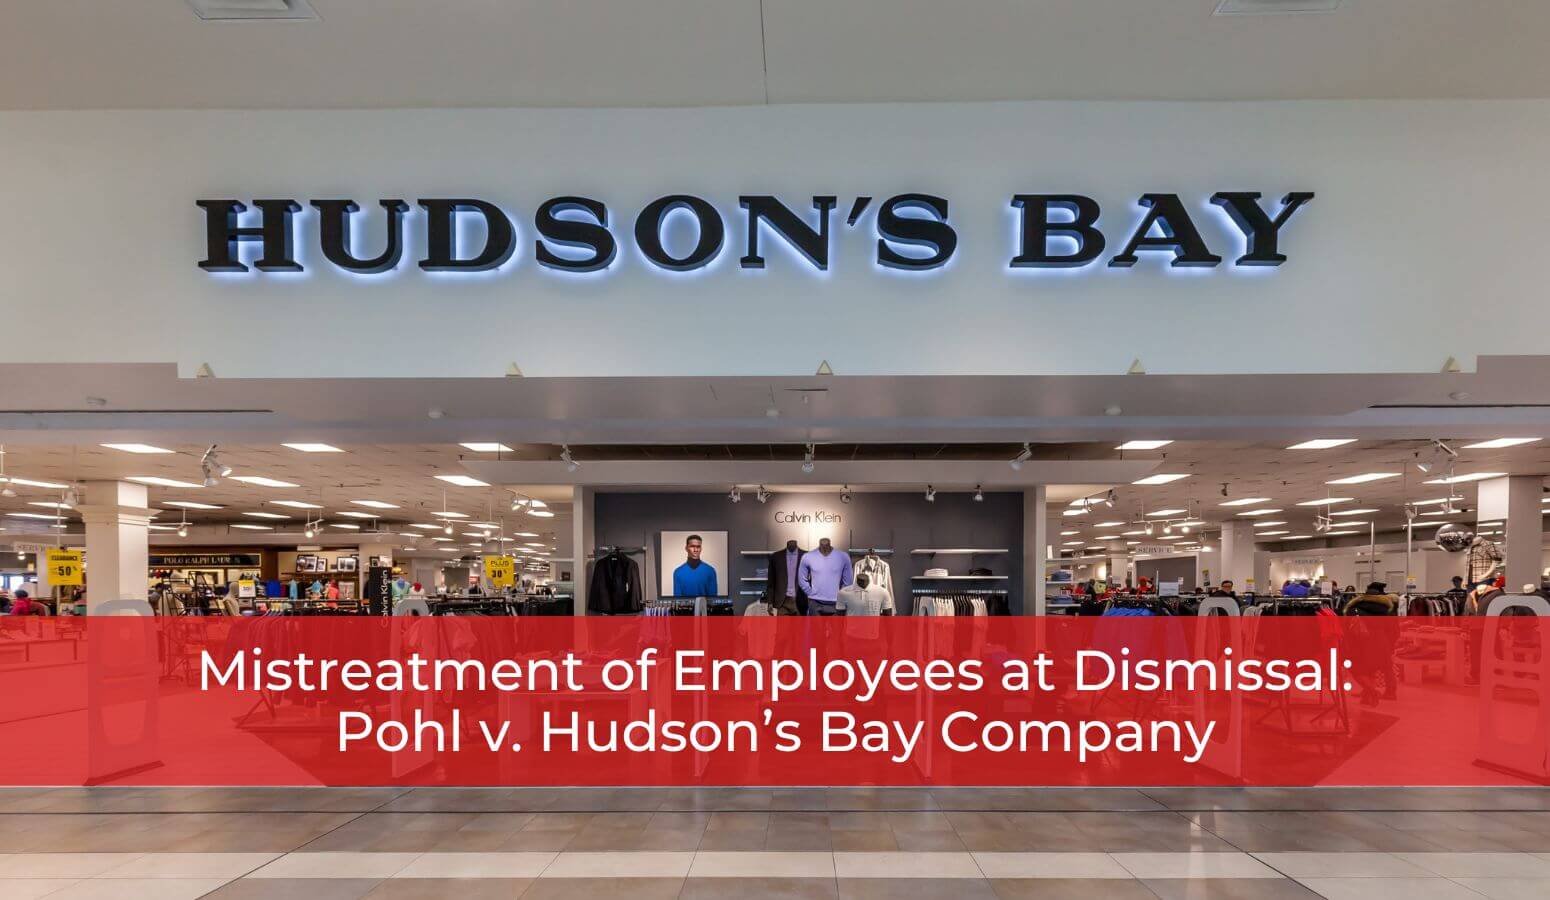 Mistreatment of Employees at Dismissal